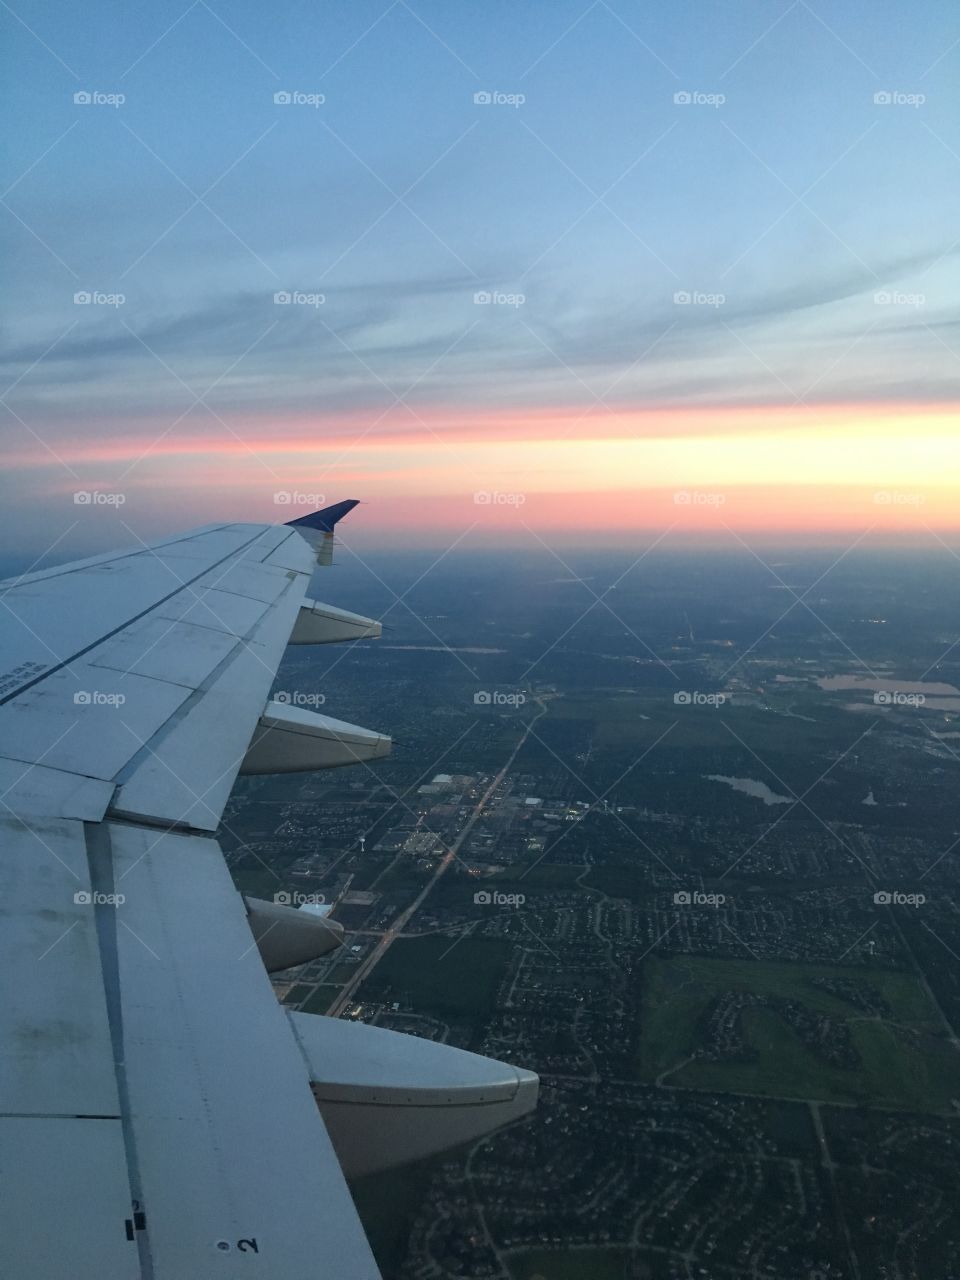 Airplane over Chicago suburb 